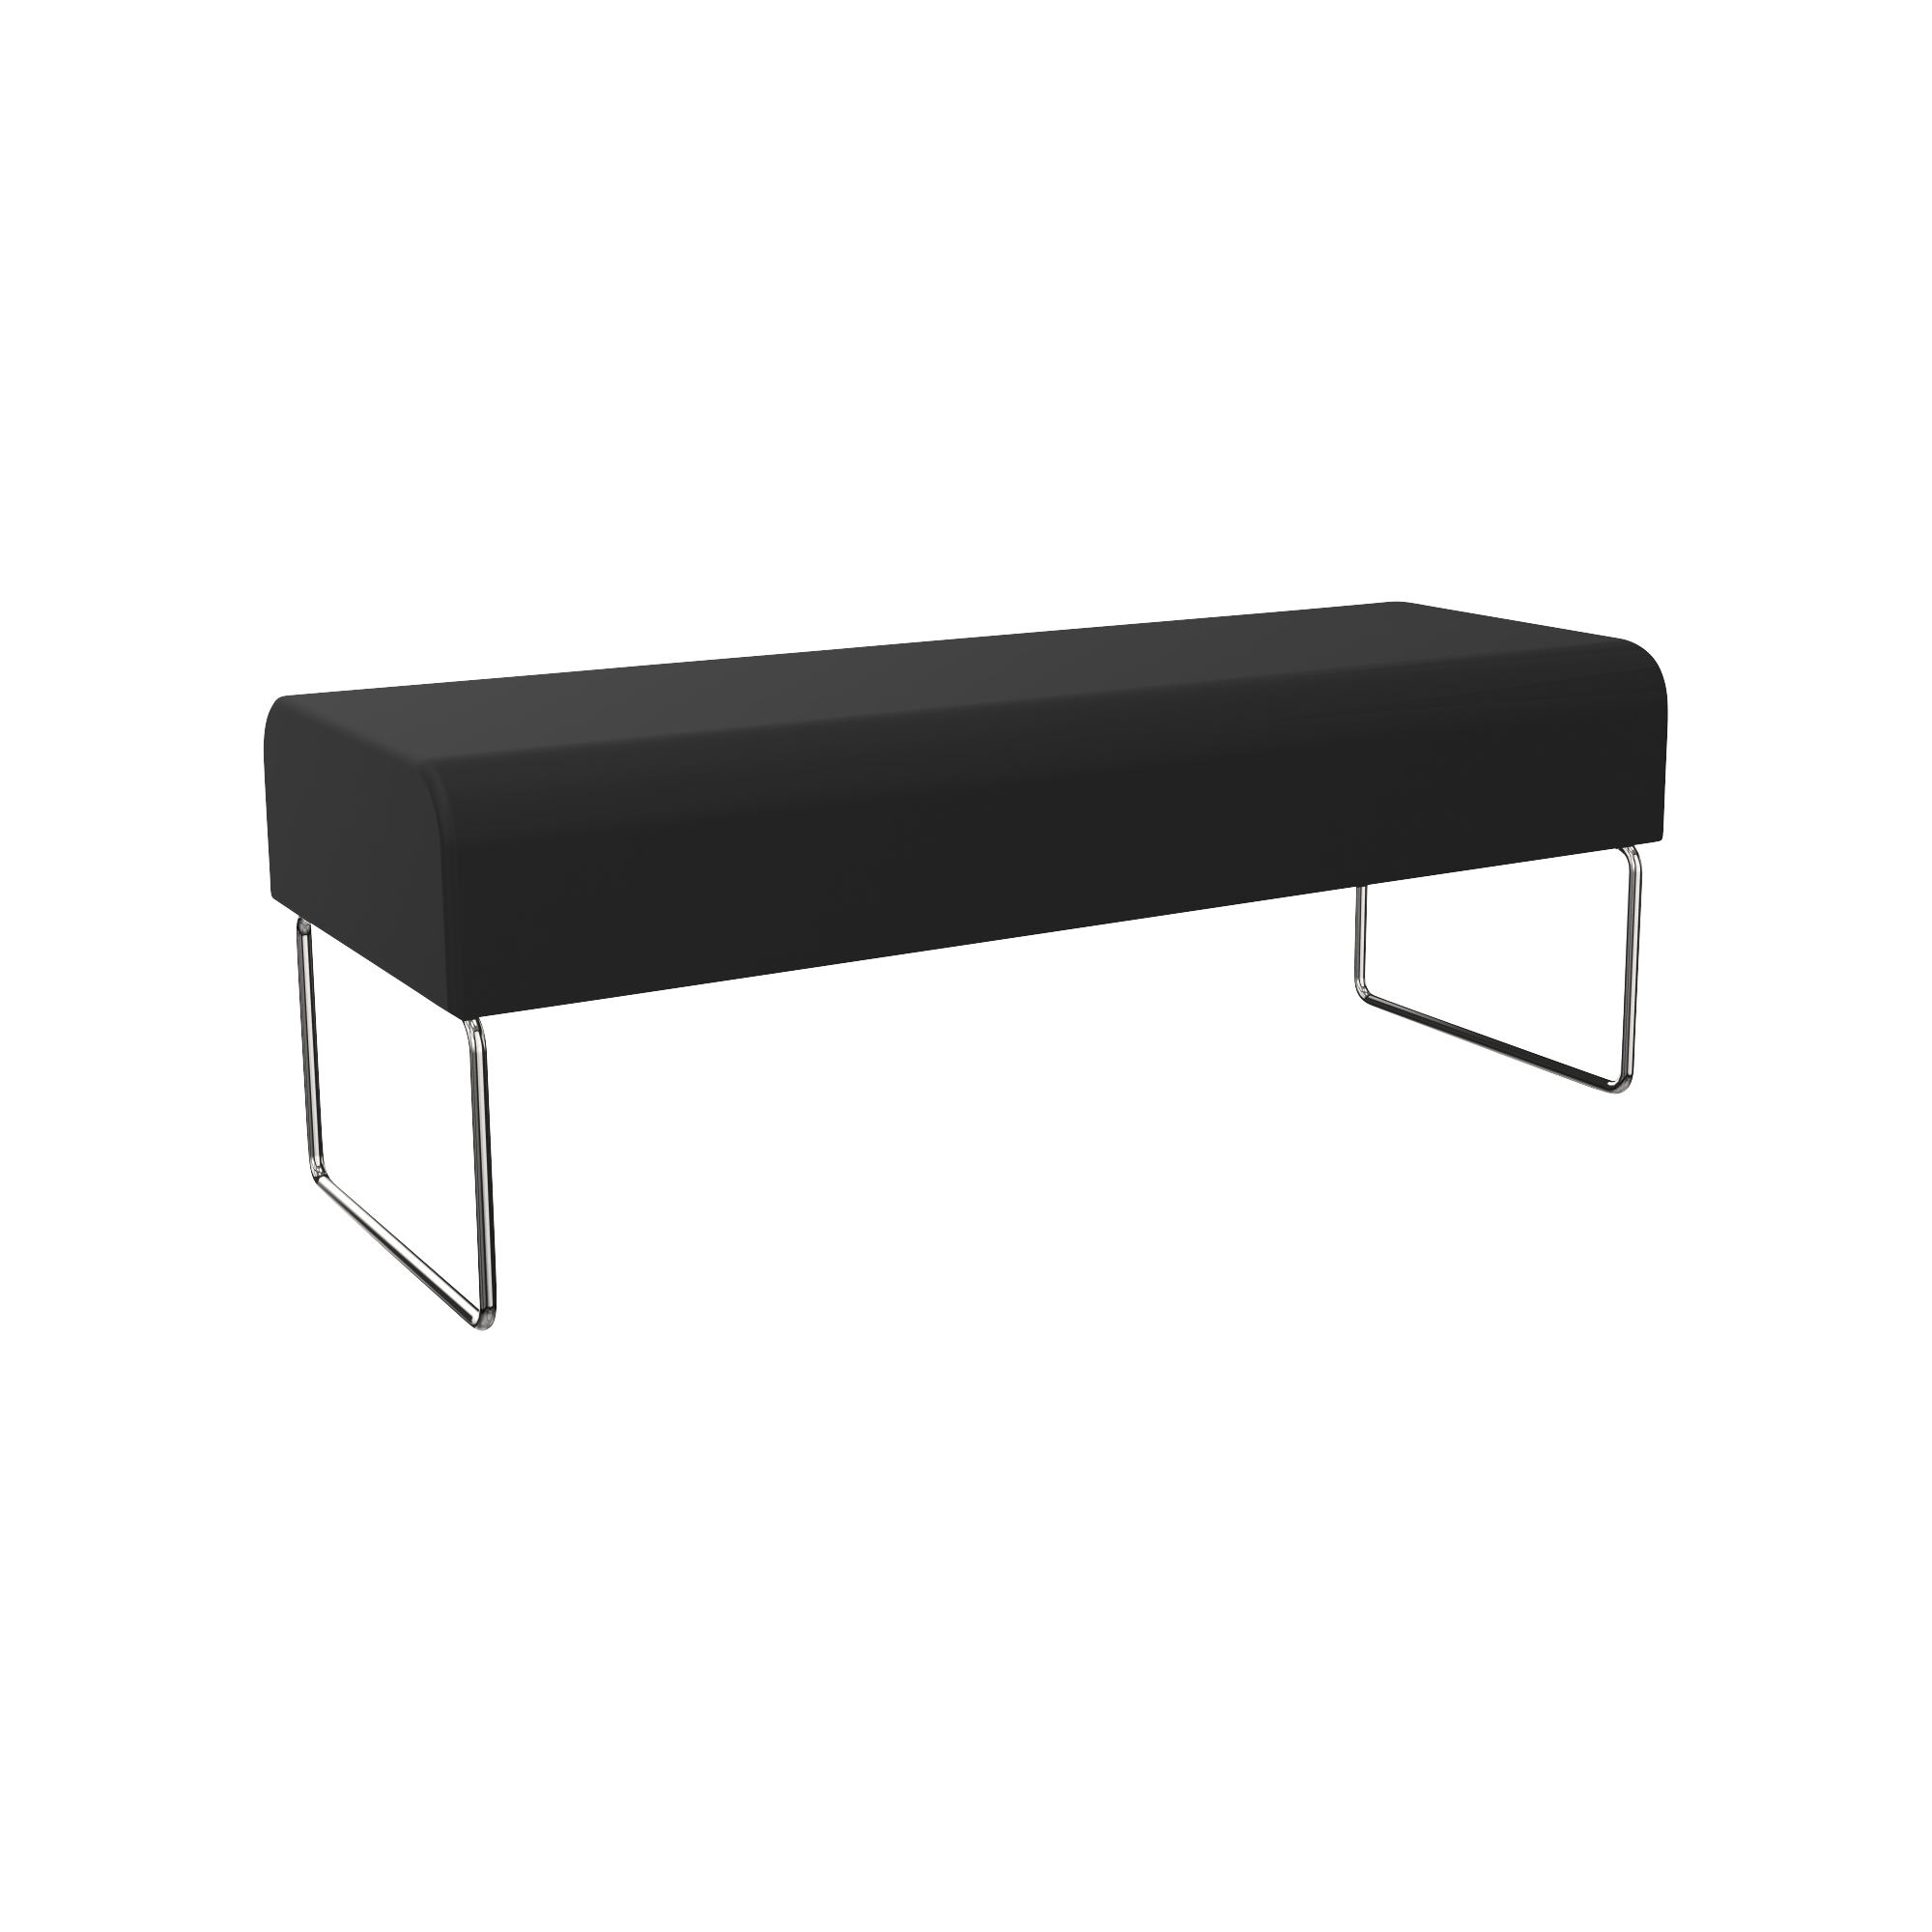 Upholstered black bench with two chrome legs